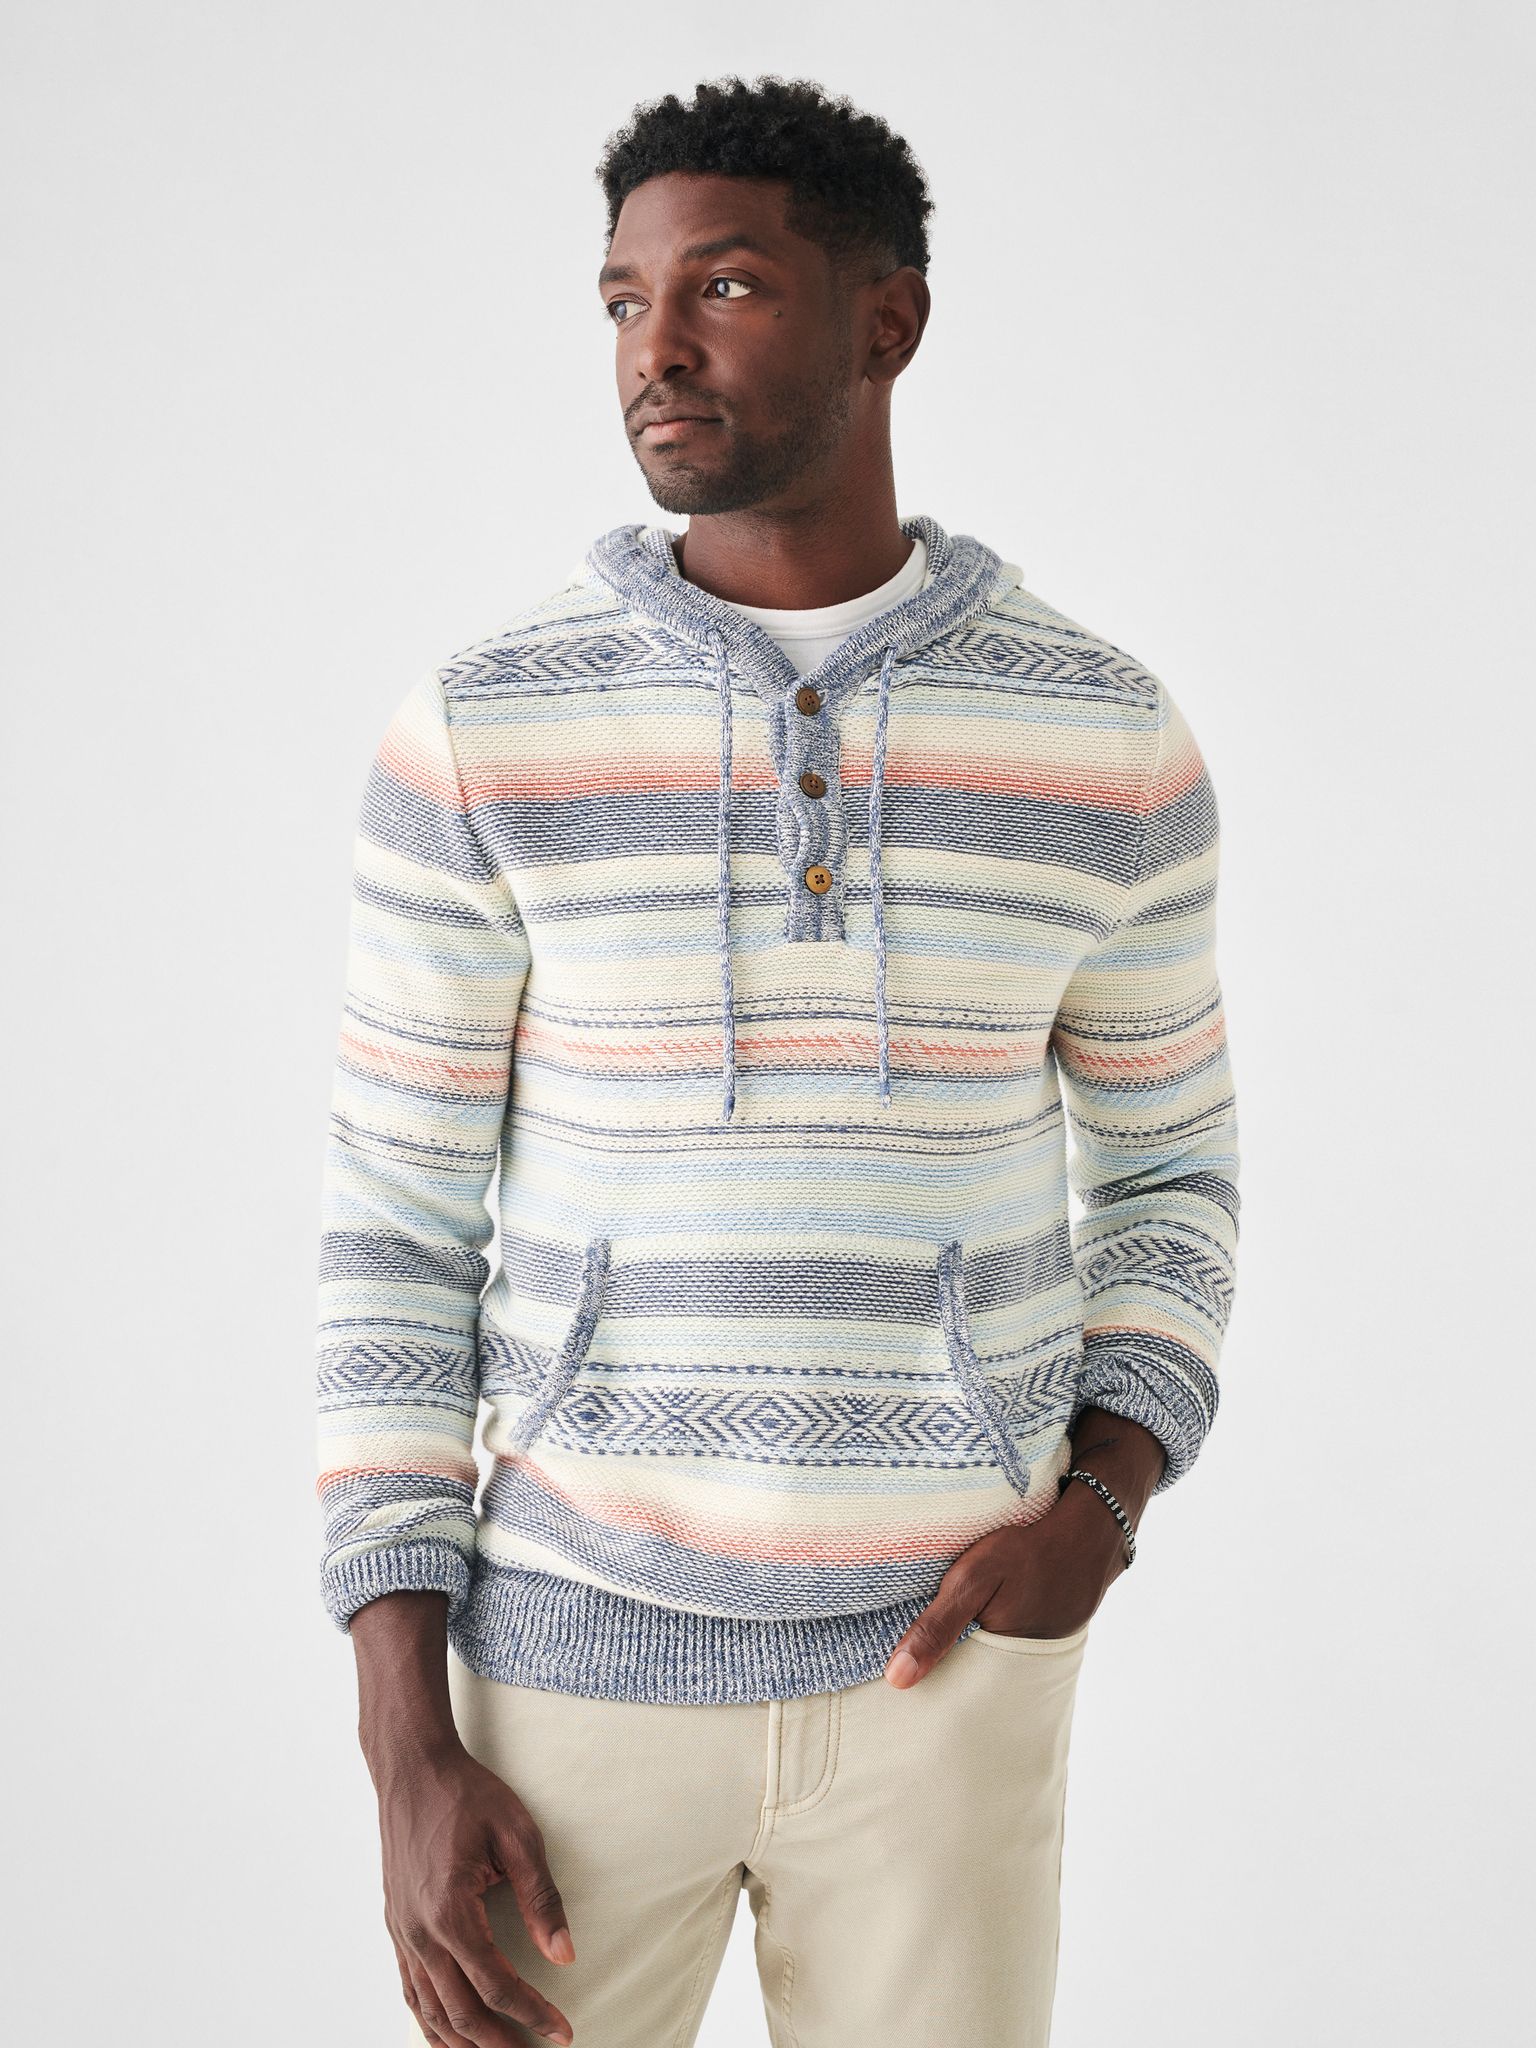 multicolored sweatshirt from Faherty